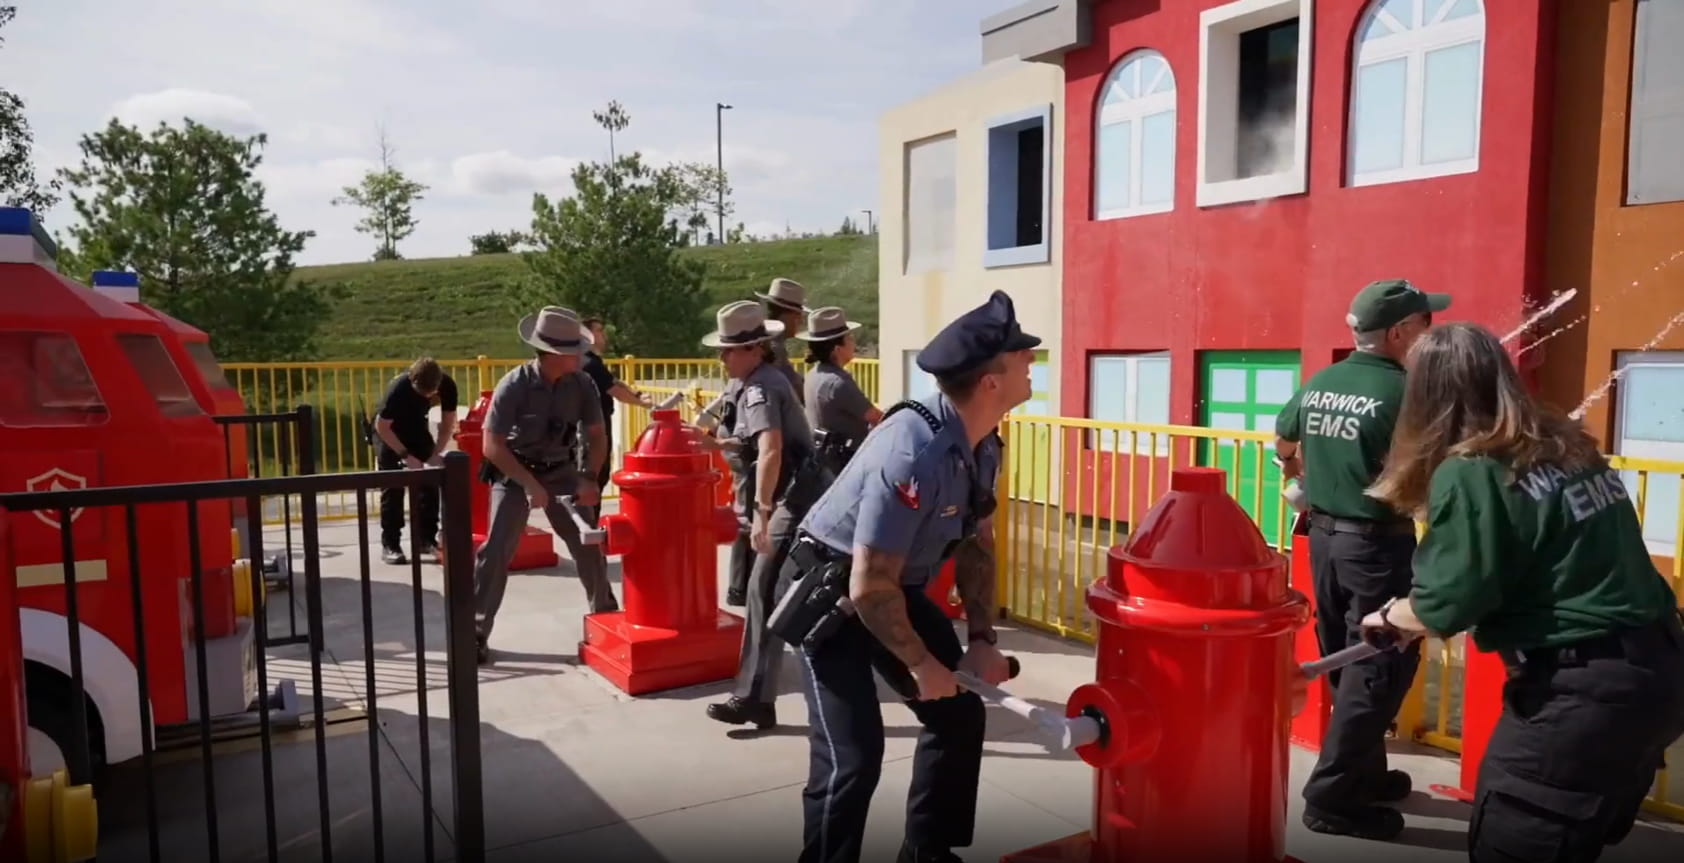 FREE admission to LEGOLAND New York for First Responders 2023